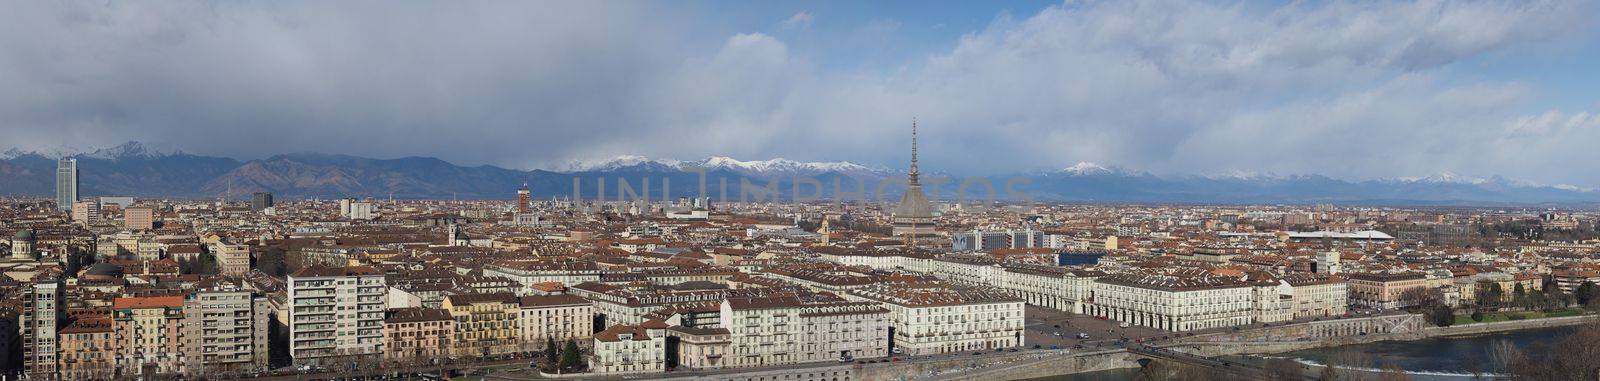 Wide panoramic aerial view of Turin by claudiodivizia